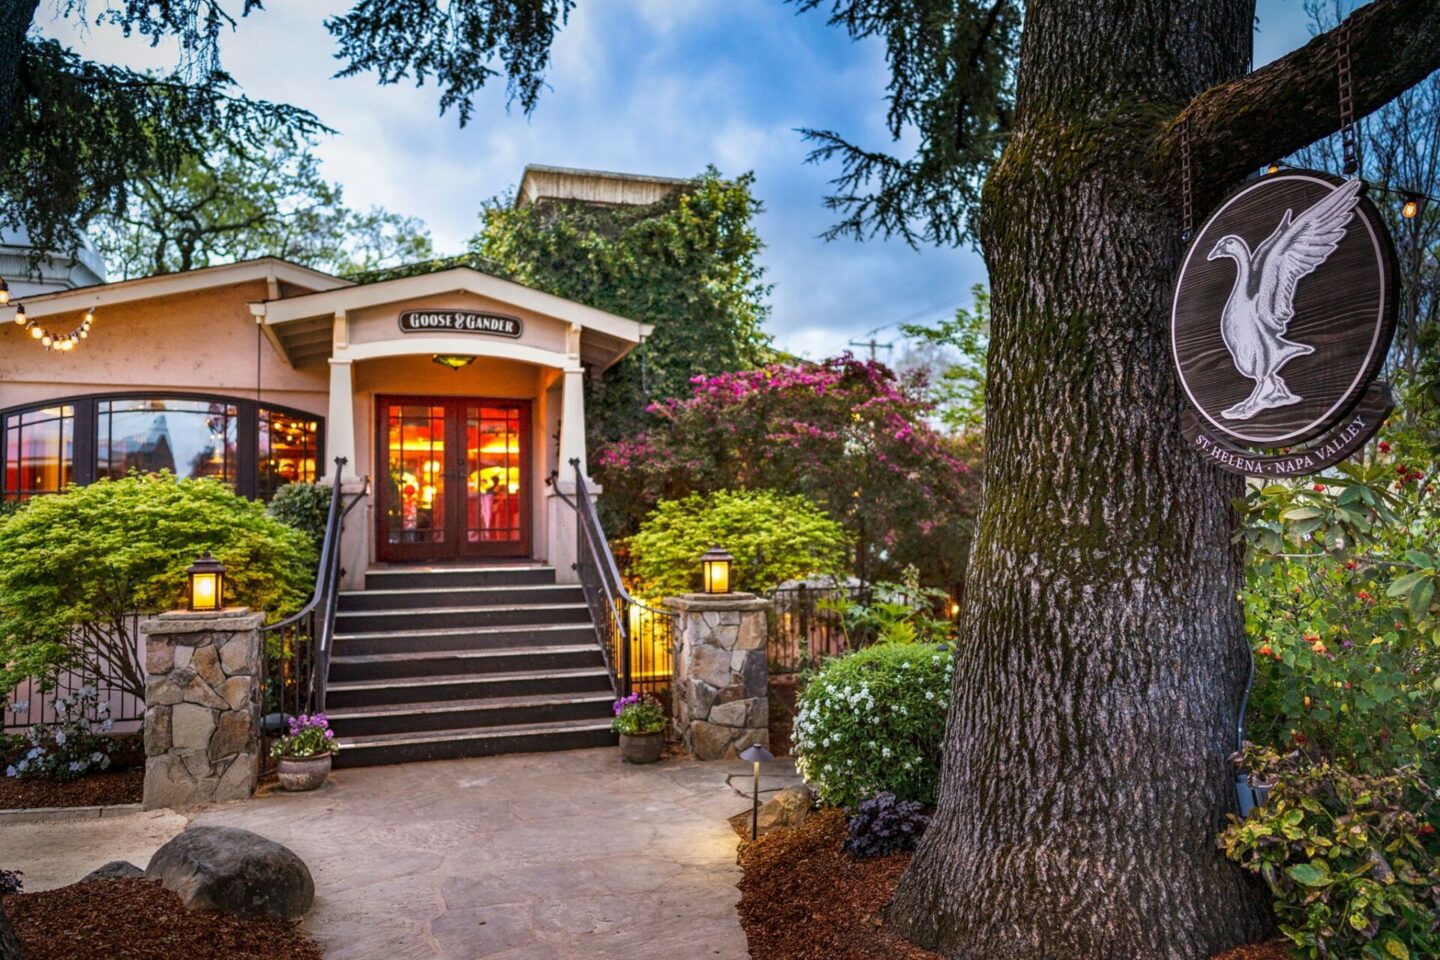 Exterior shot of the Goose and Gander Restaurant in St Helena, CA housed in a historical craftsman